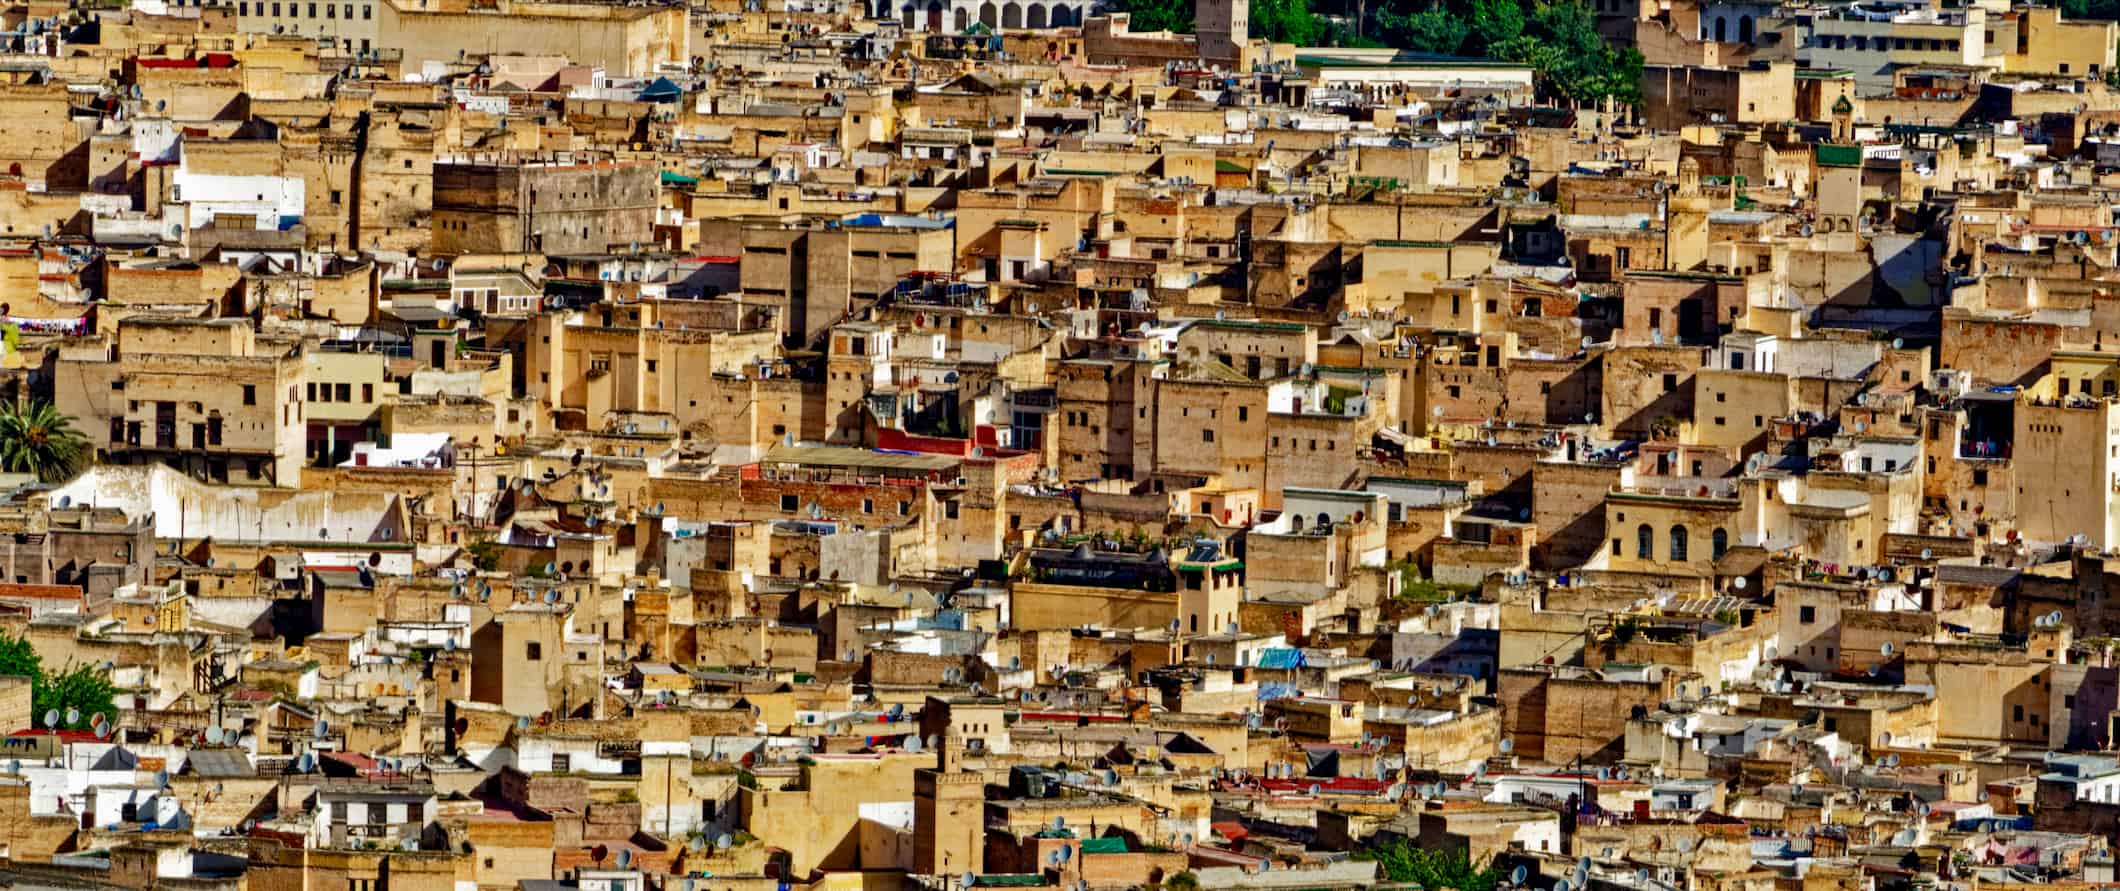 Sprawling traditional houses in cramped Fez, Morocco